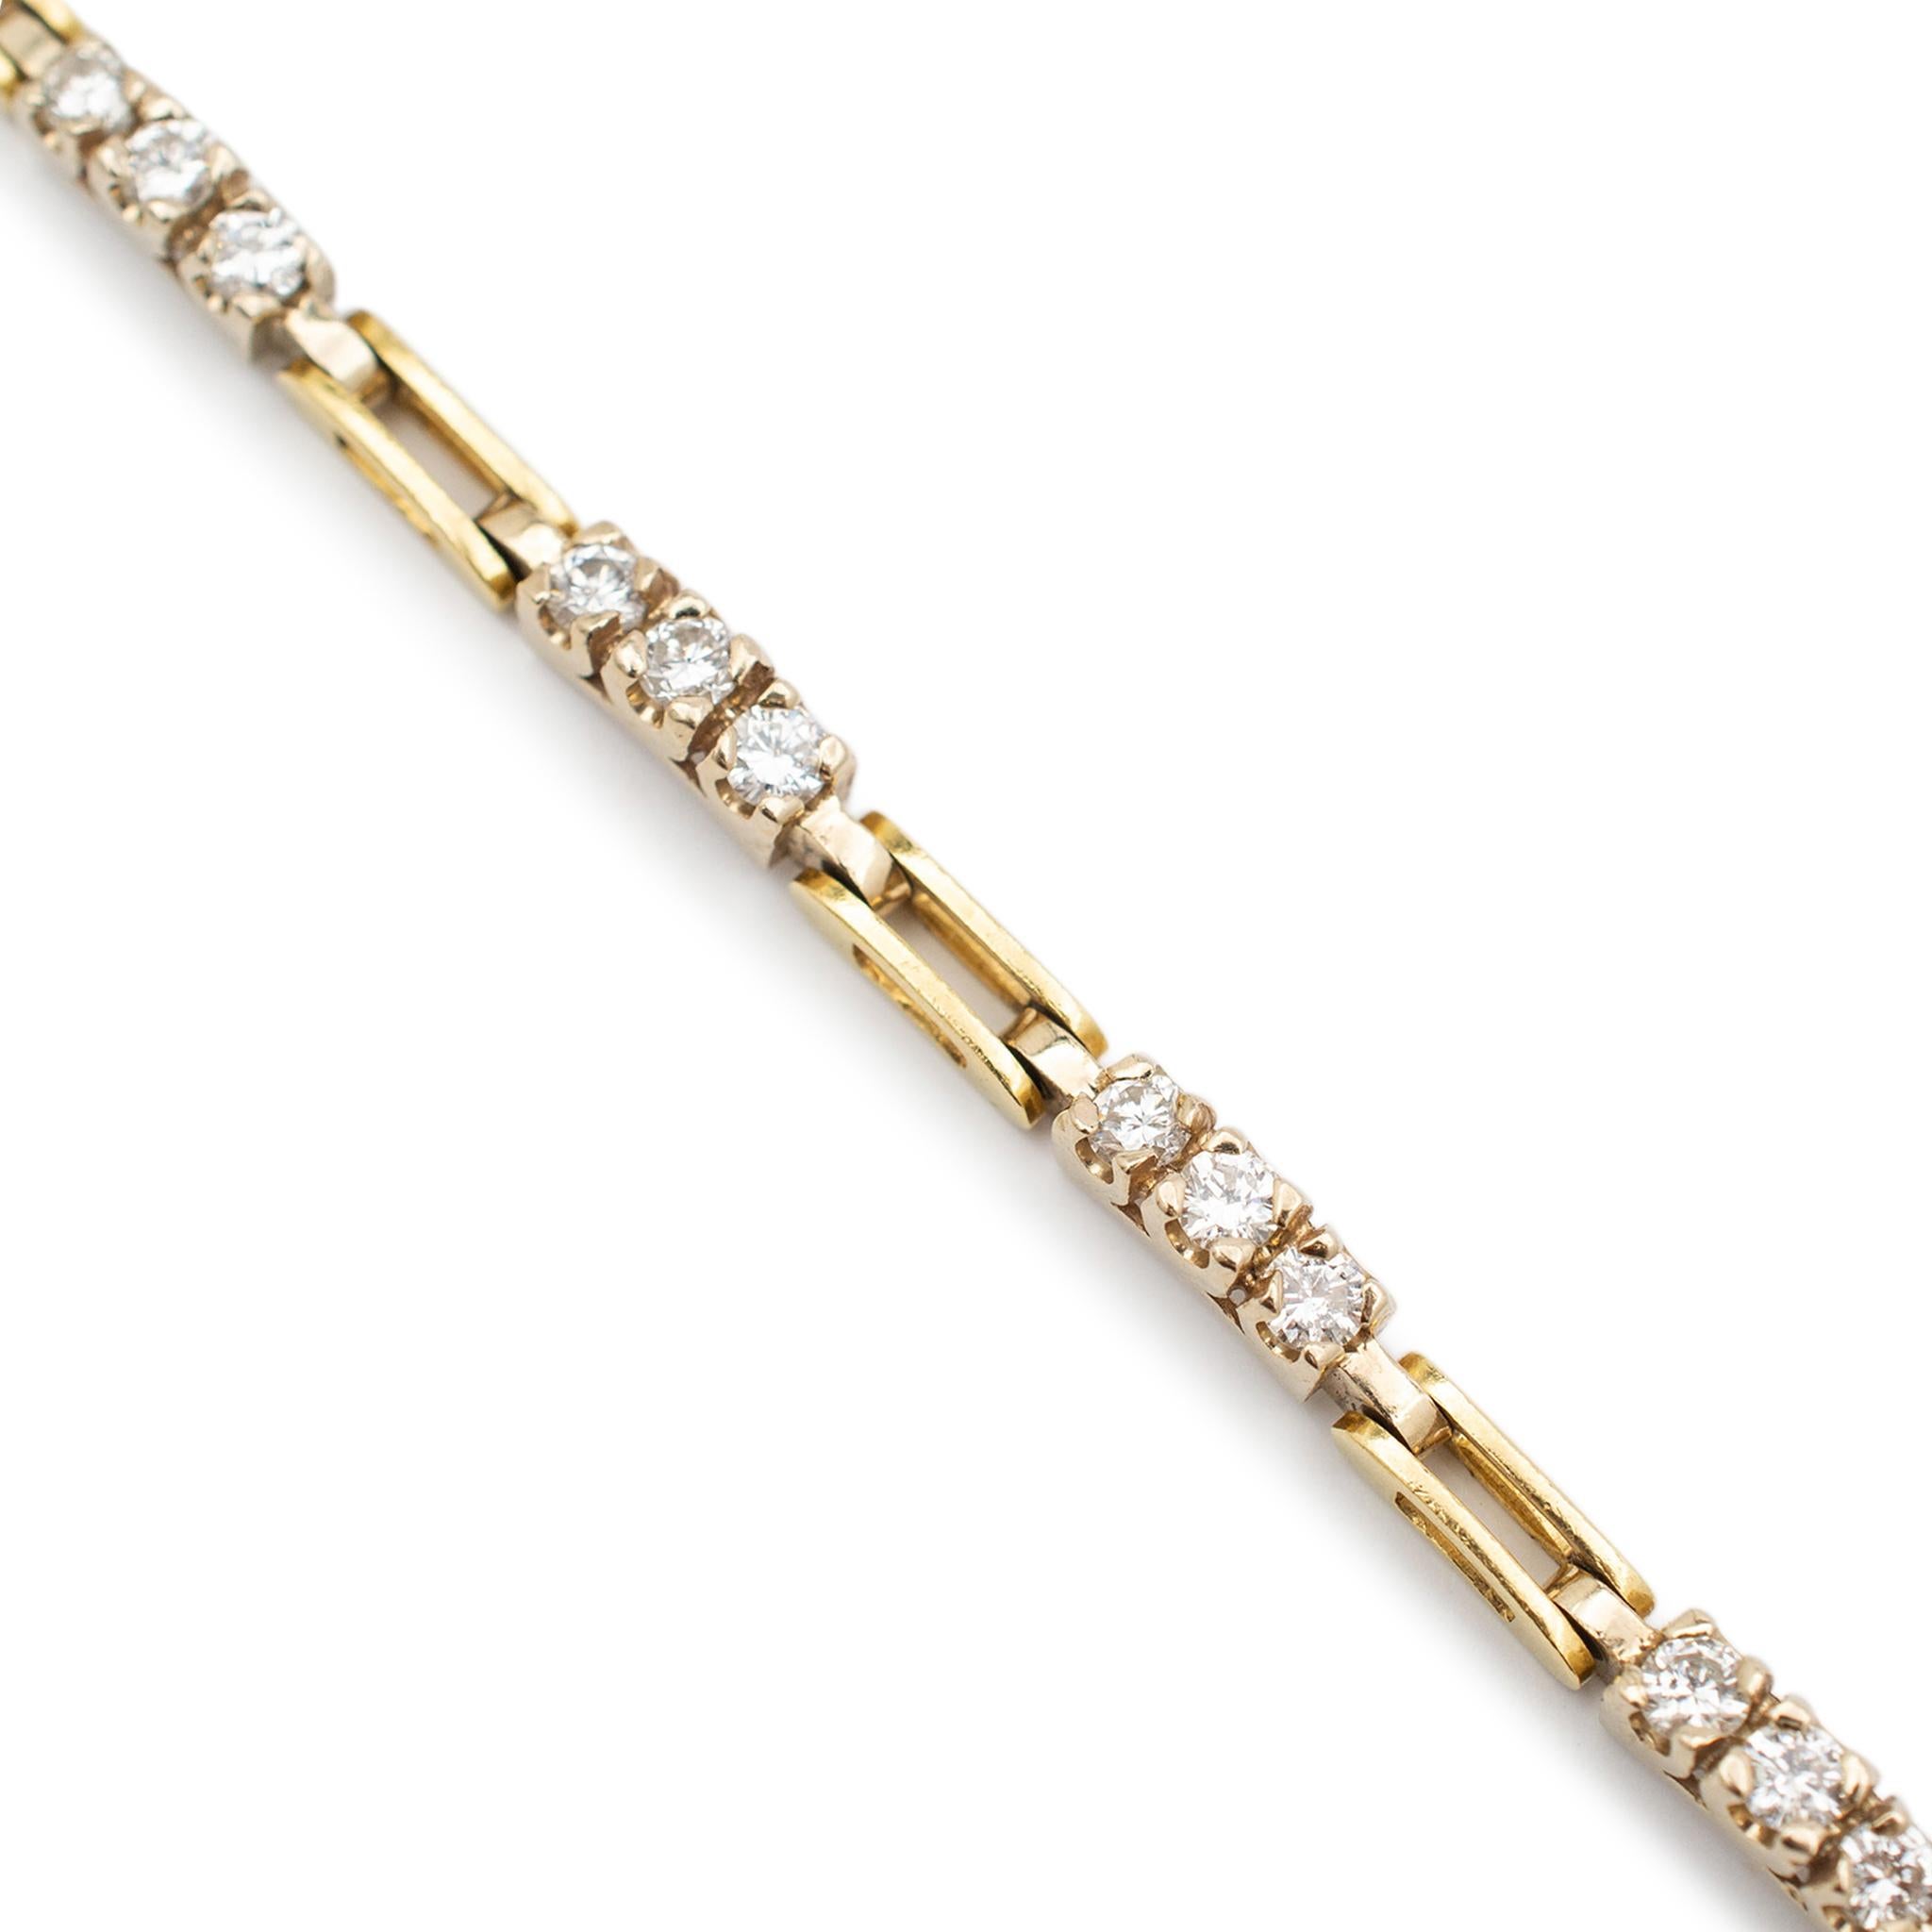 <p>Gender: Ladies</p>
<p>Metal Type: 18K Yellow Gold</p>
<p>Length: <strong></strong>7.50 Inches</p>
<p>Width: 3.45 mm</p>
<p>Weight: 14.00 grams.</p>
<p>18K yellow gold diamond link bracelet. Engraved with 